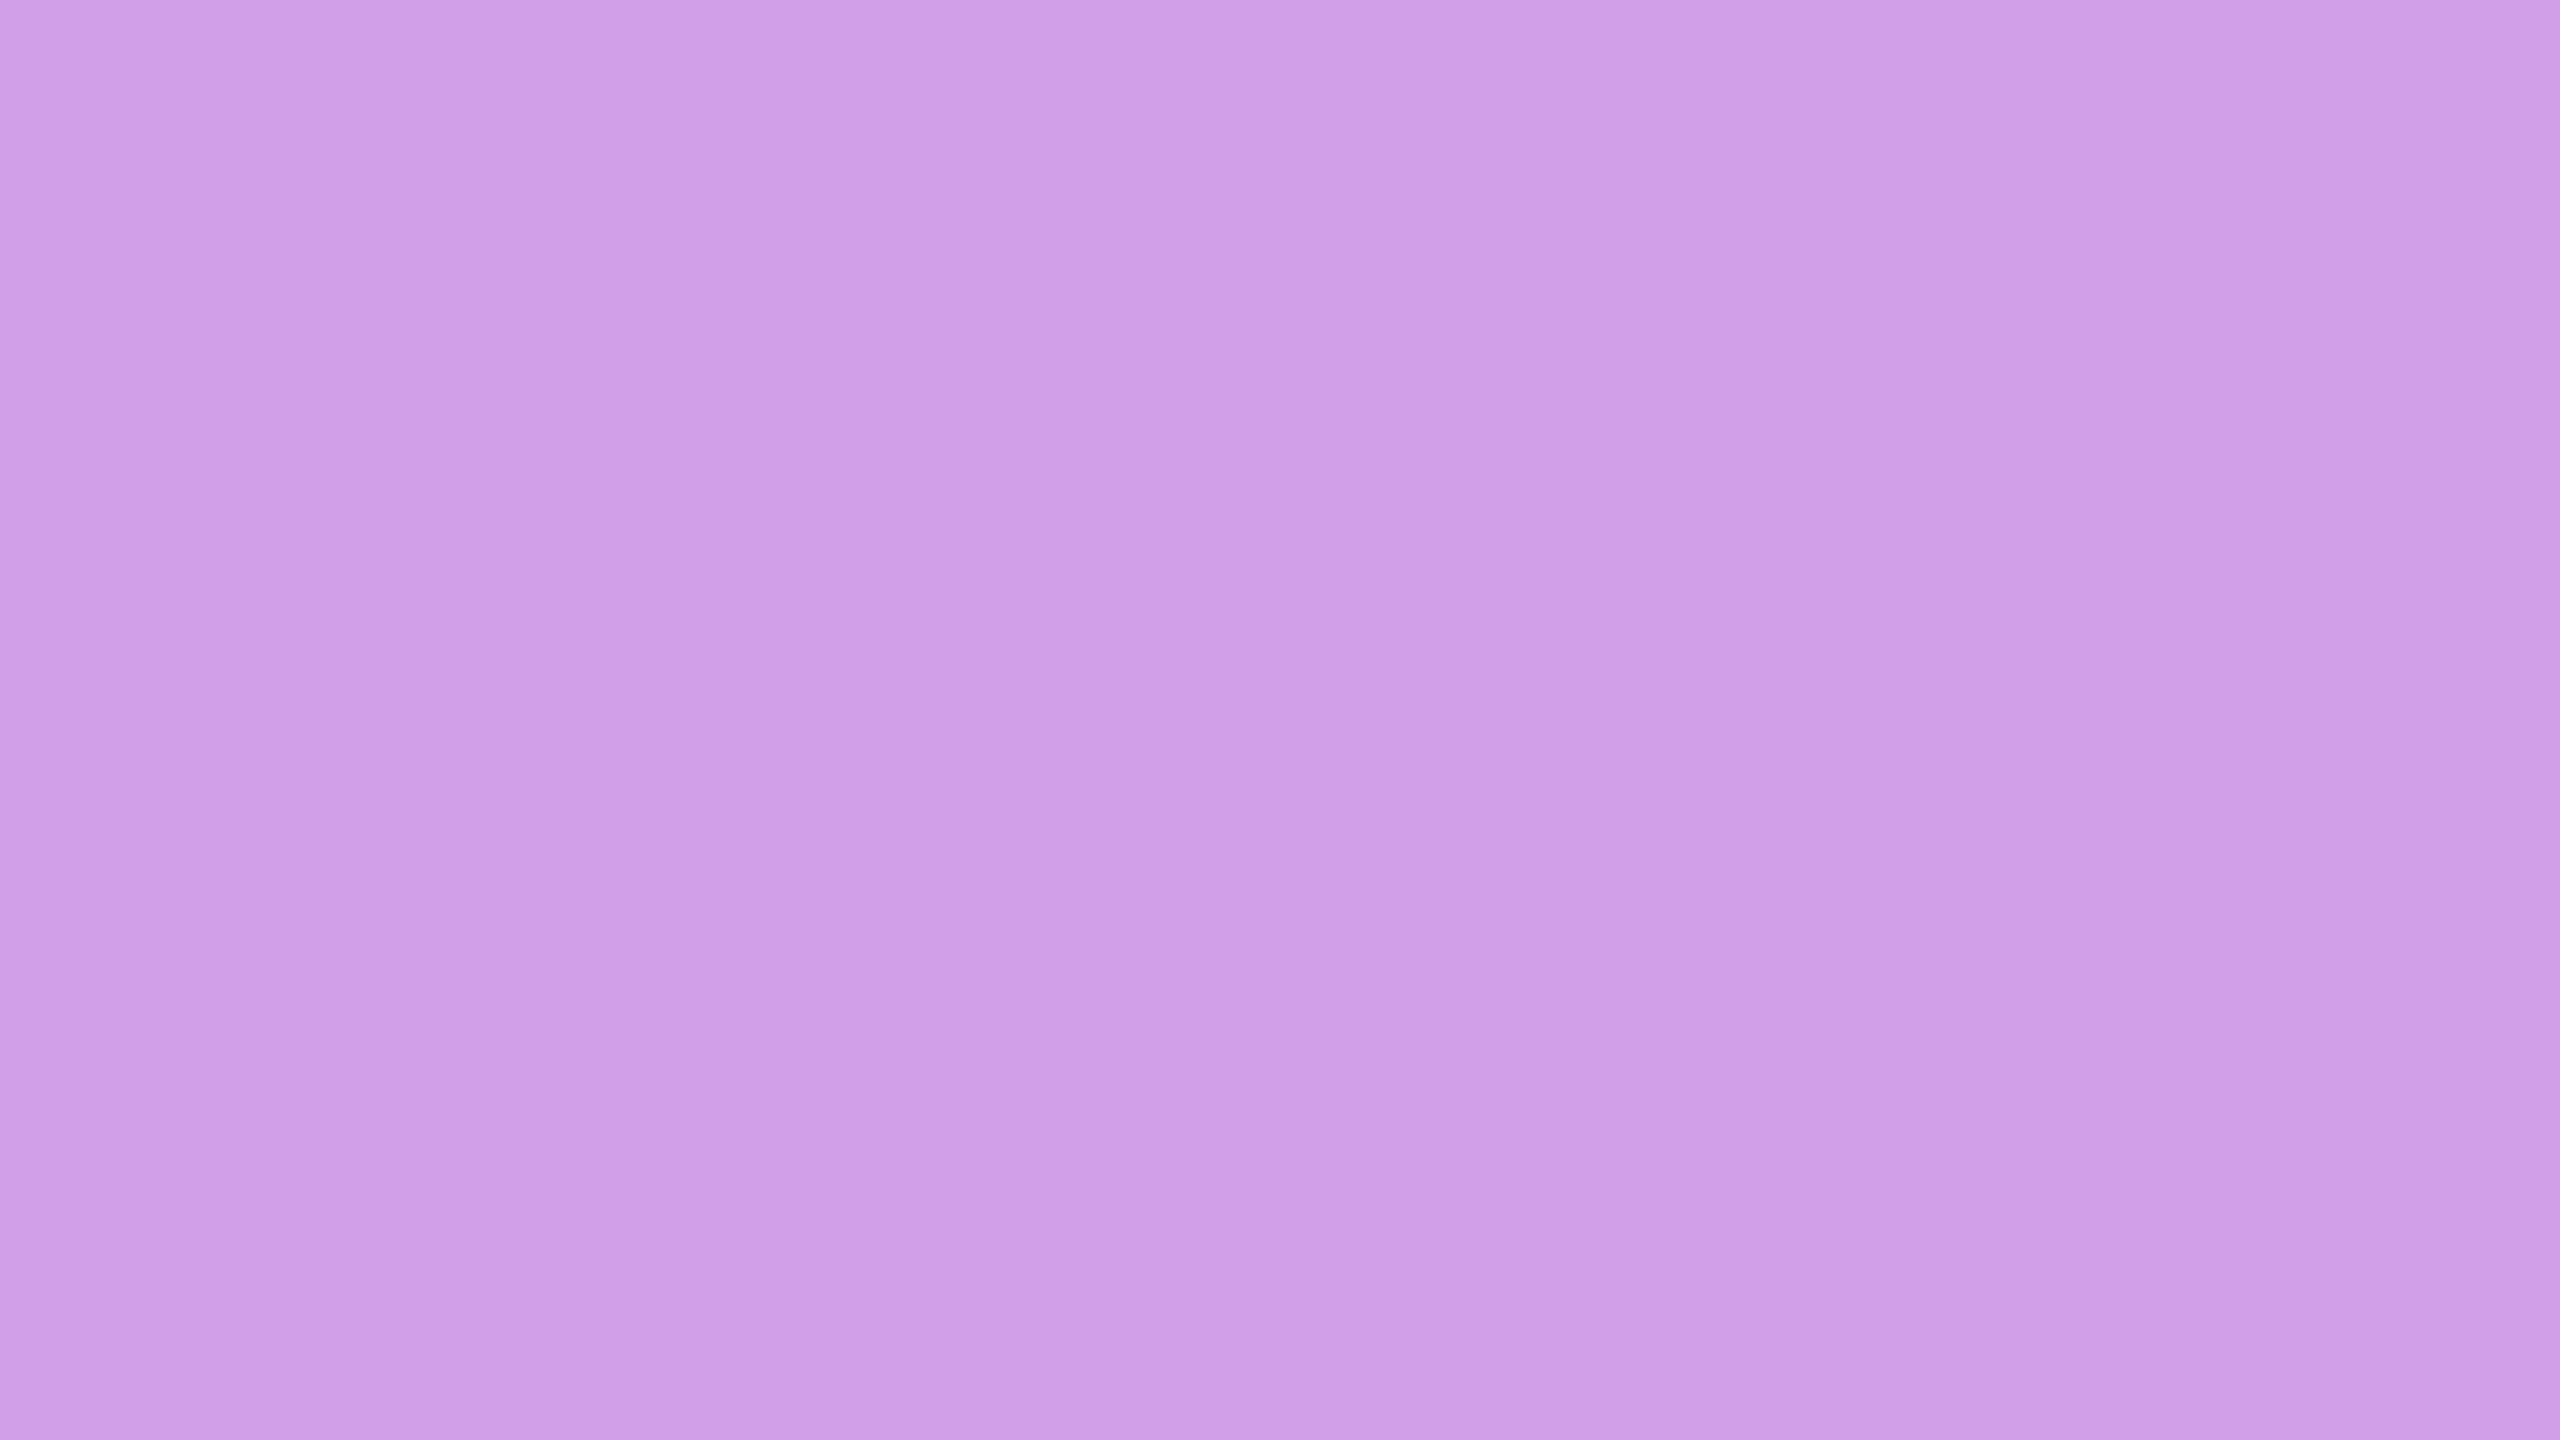 2560x1440-bright-ube-solid-color-background.jpg